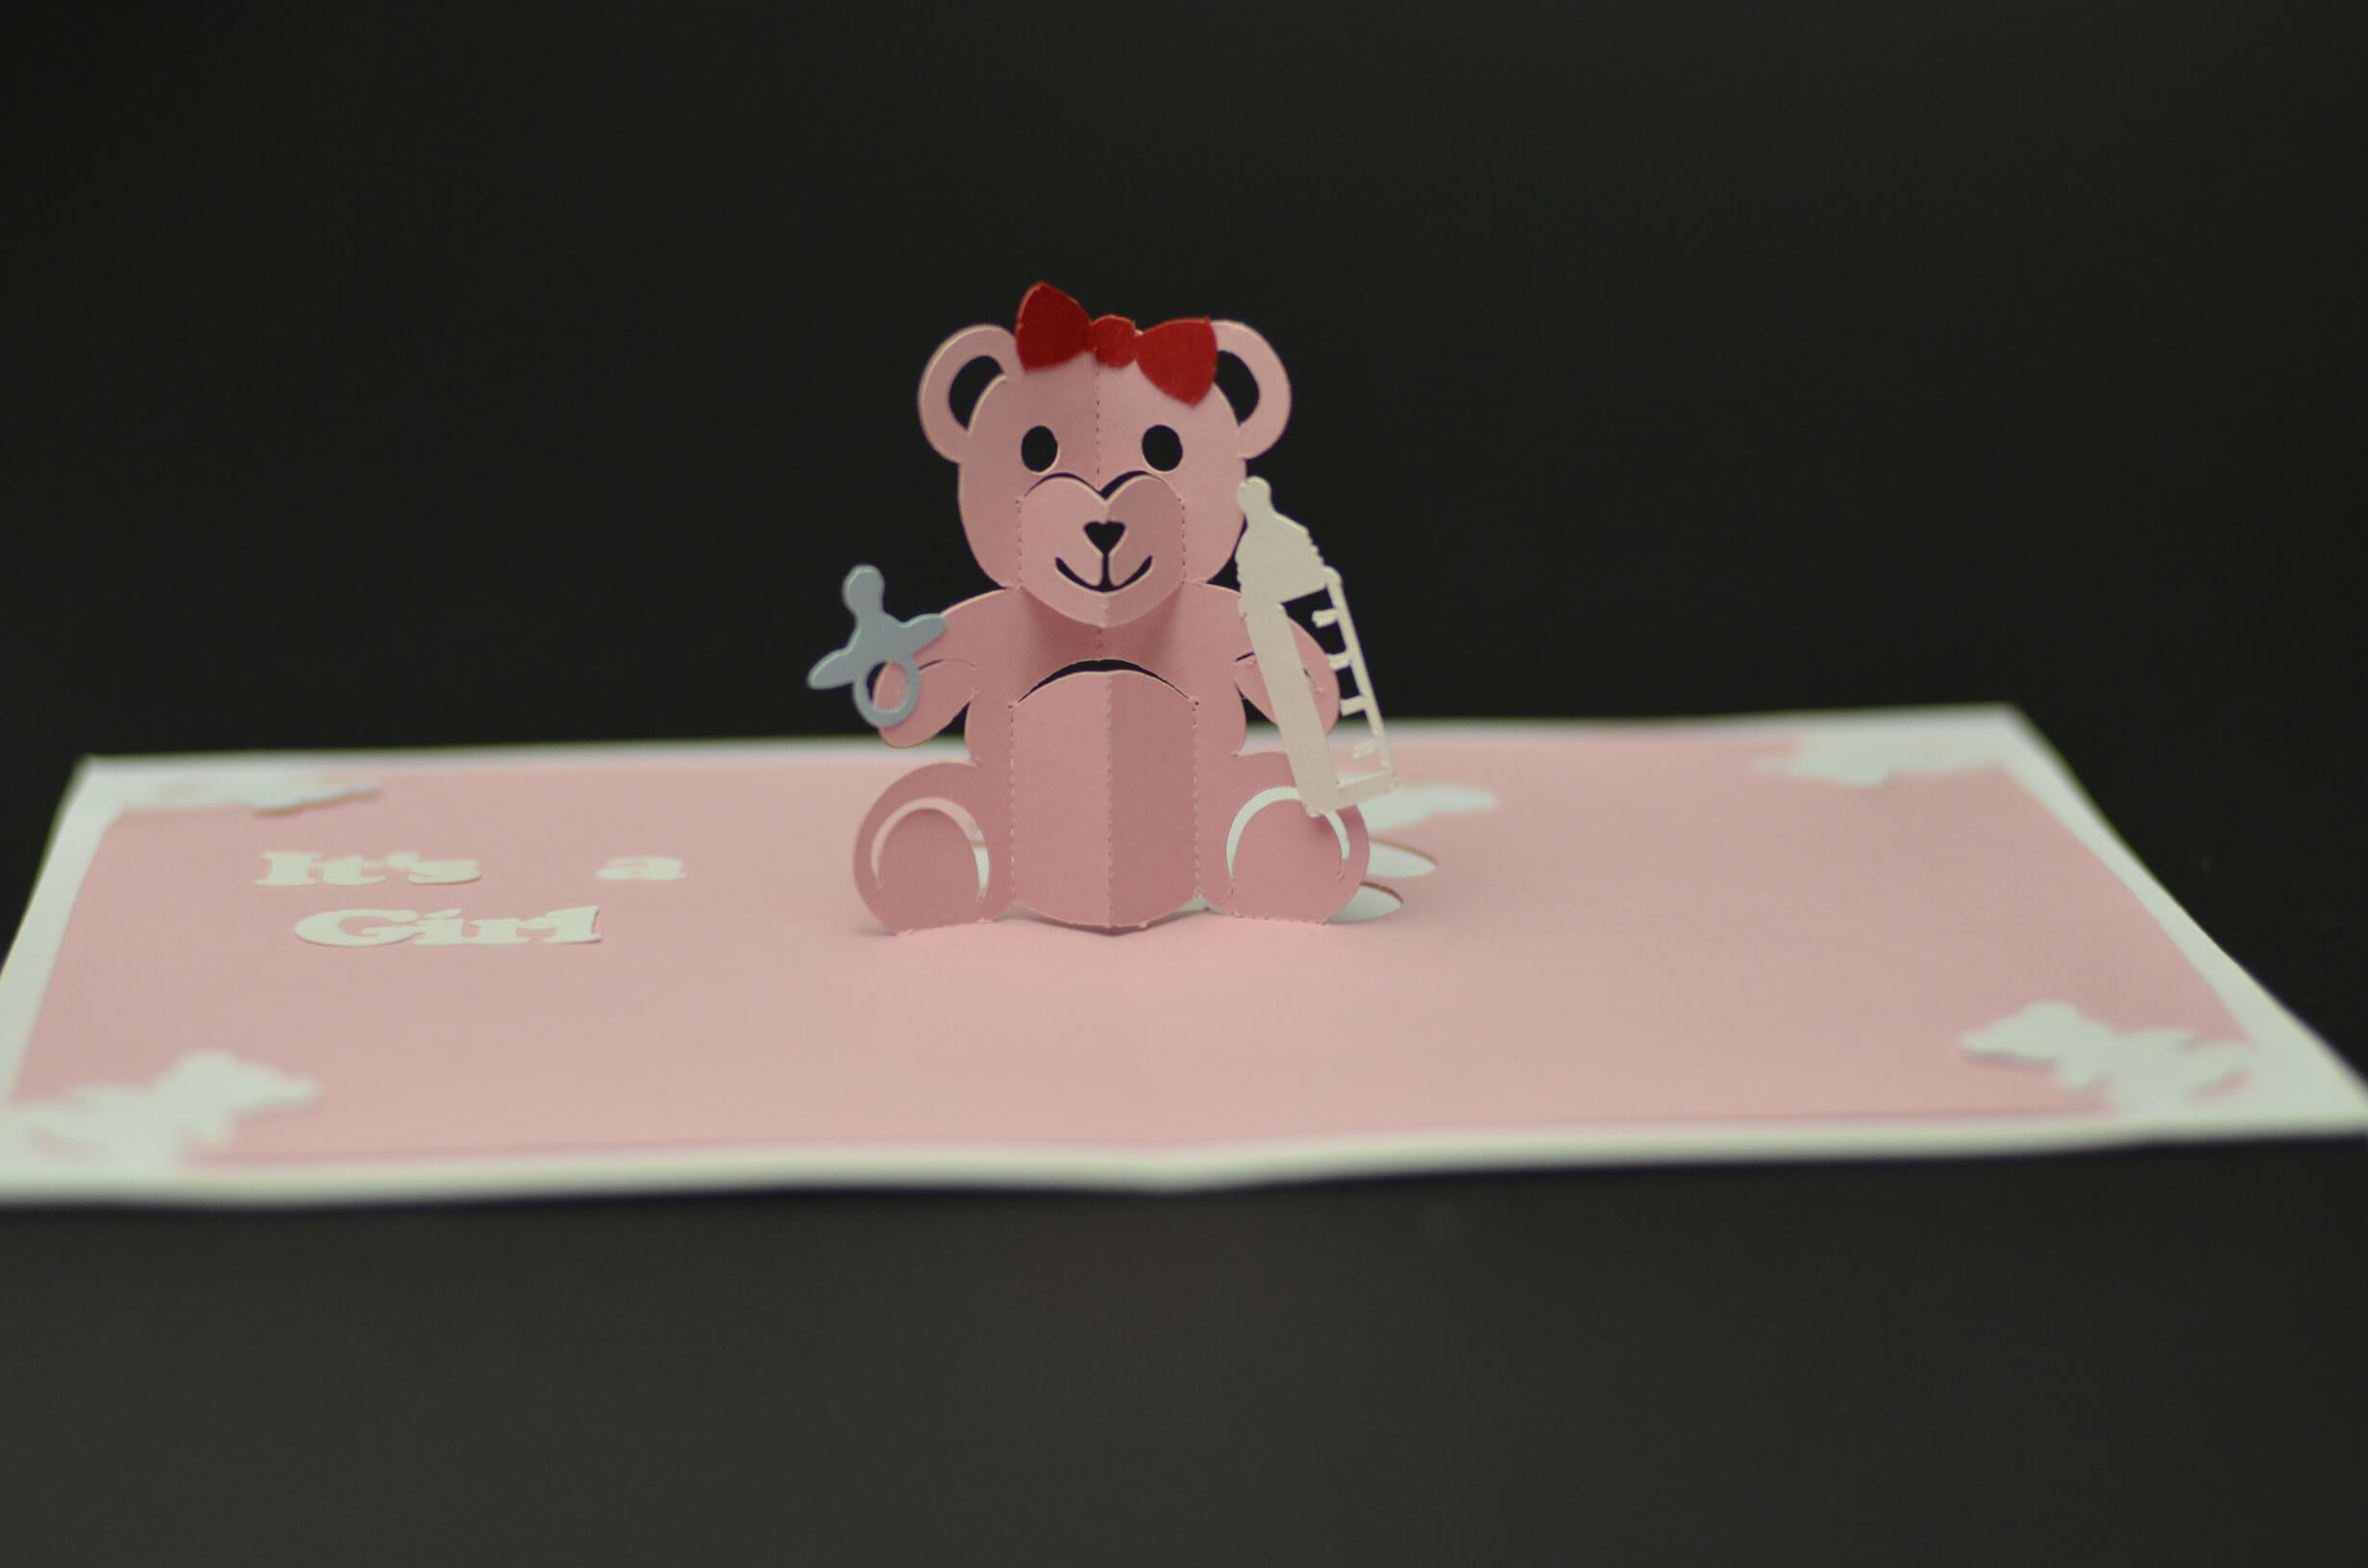 Teddy Bear Pop Up Card: Tutorial And Template – Creative Pop Throughout Teddy Bear Pop Up Card Template Free